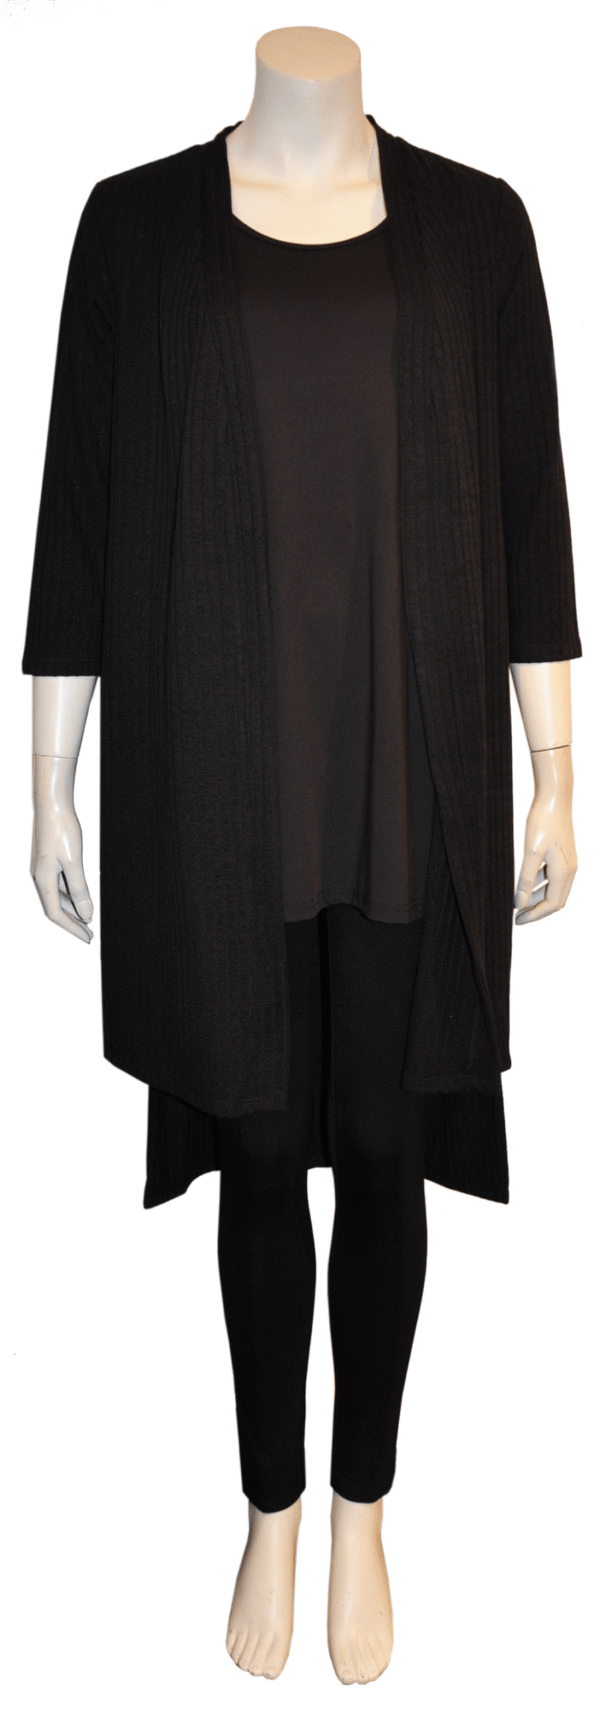 BLACK KNIT CARDIGAN WITH SIDE SLITS- FRONT